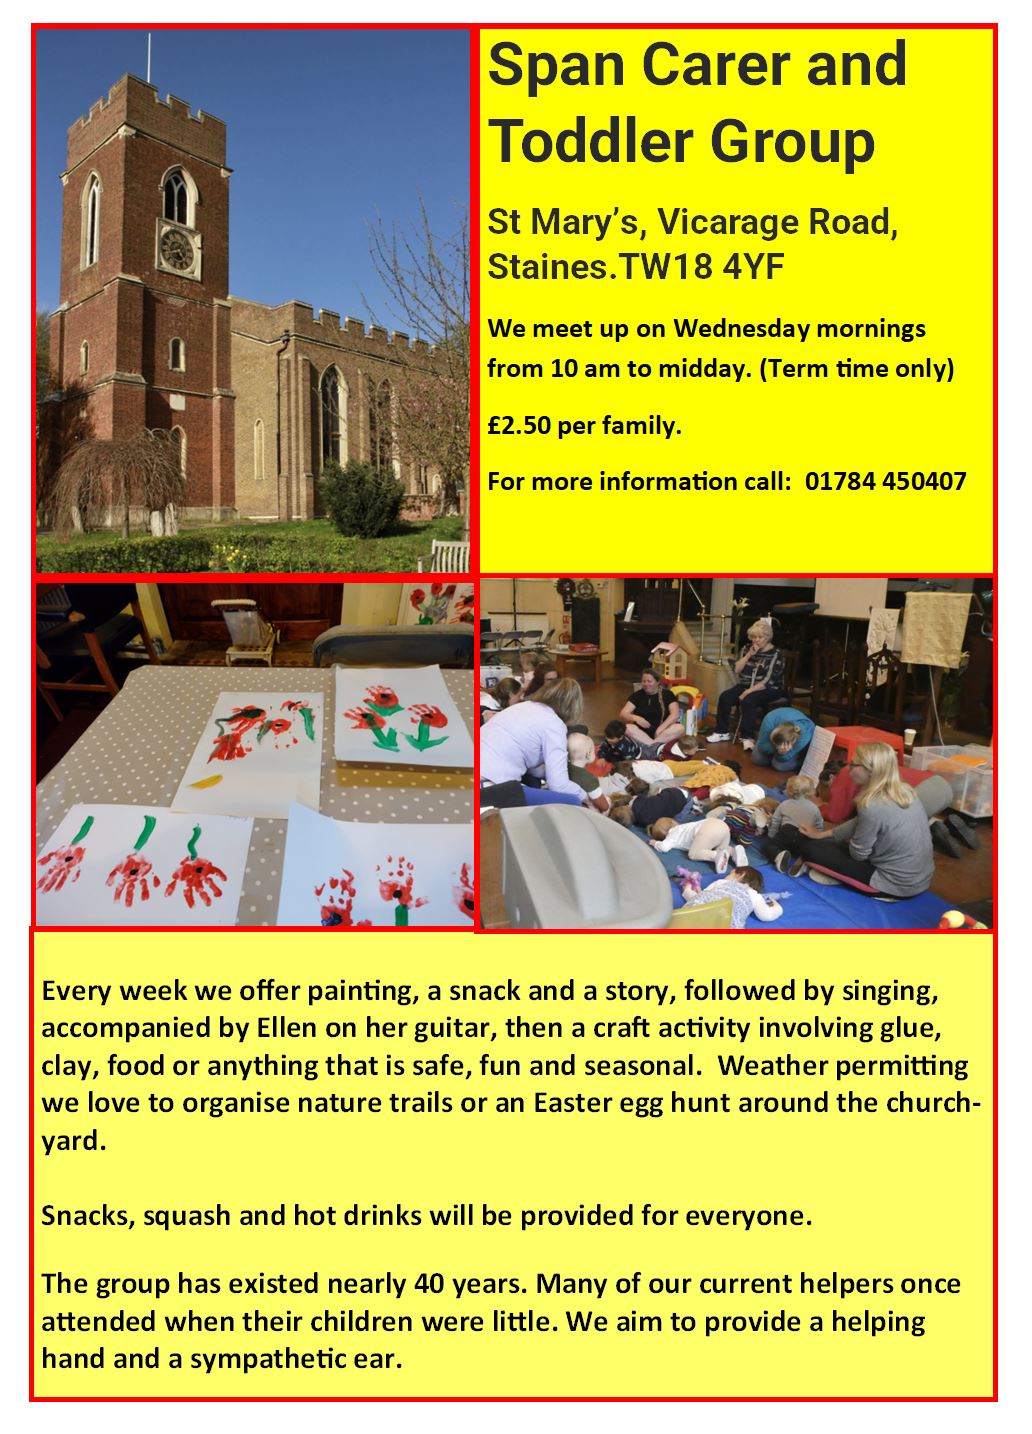 Span Carer & Toddler Group meets for pre school children in St Mary’s Church Hall,  10am - 12pm on Wednesdays during term time.  A suggested donation of £2.50 per family applies, which covers craft materials and refreshments.